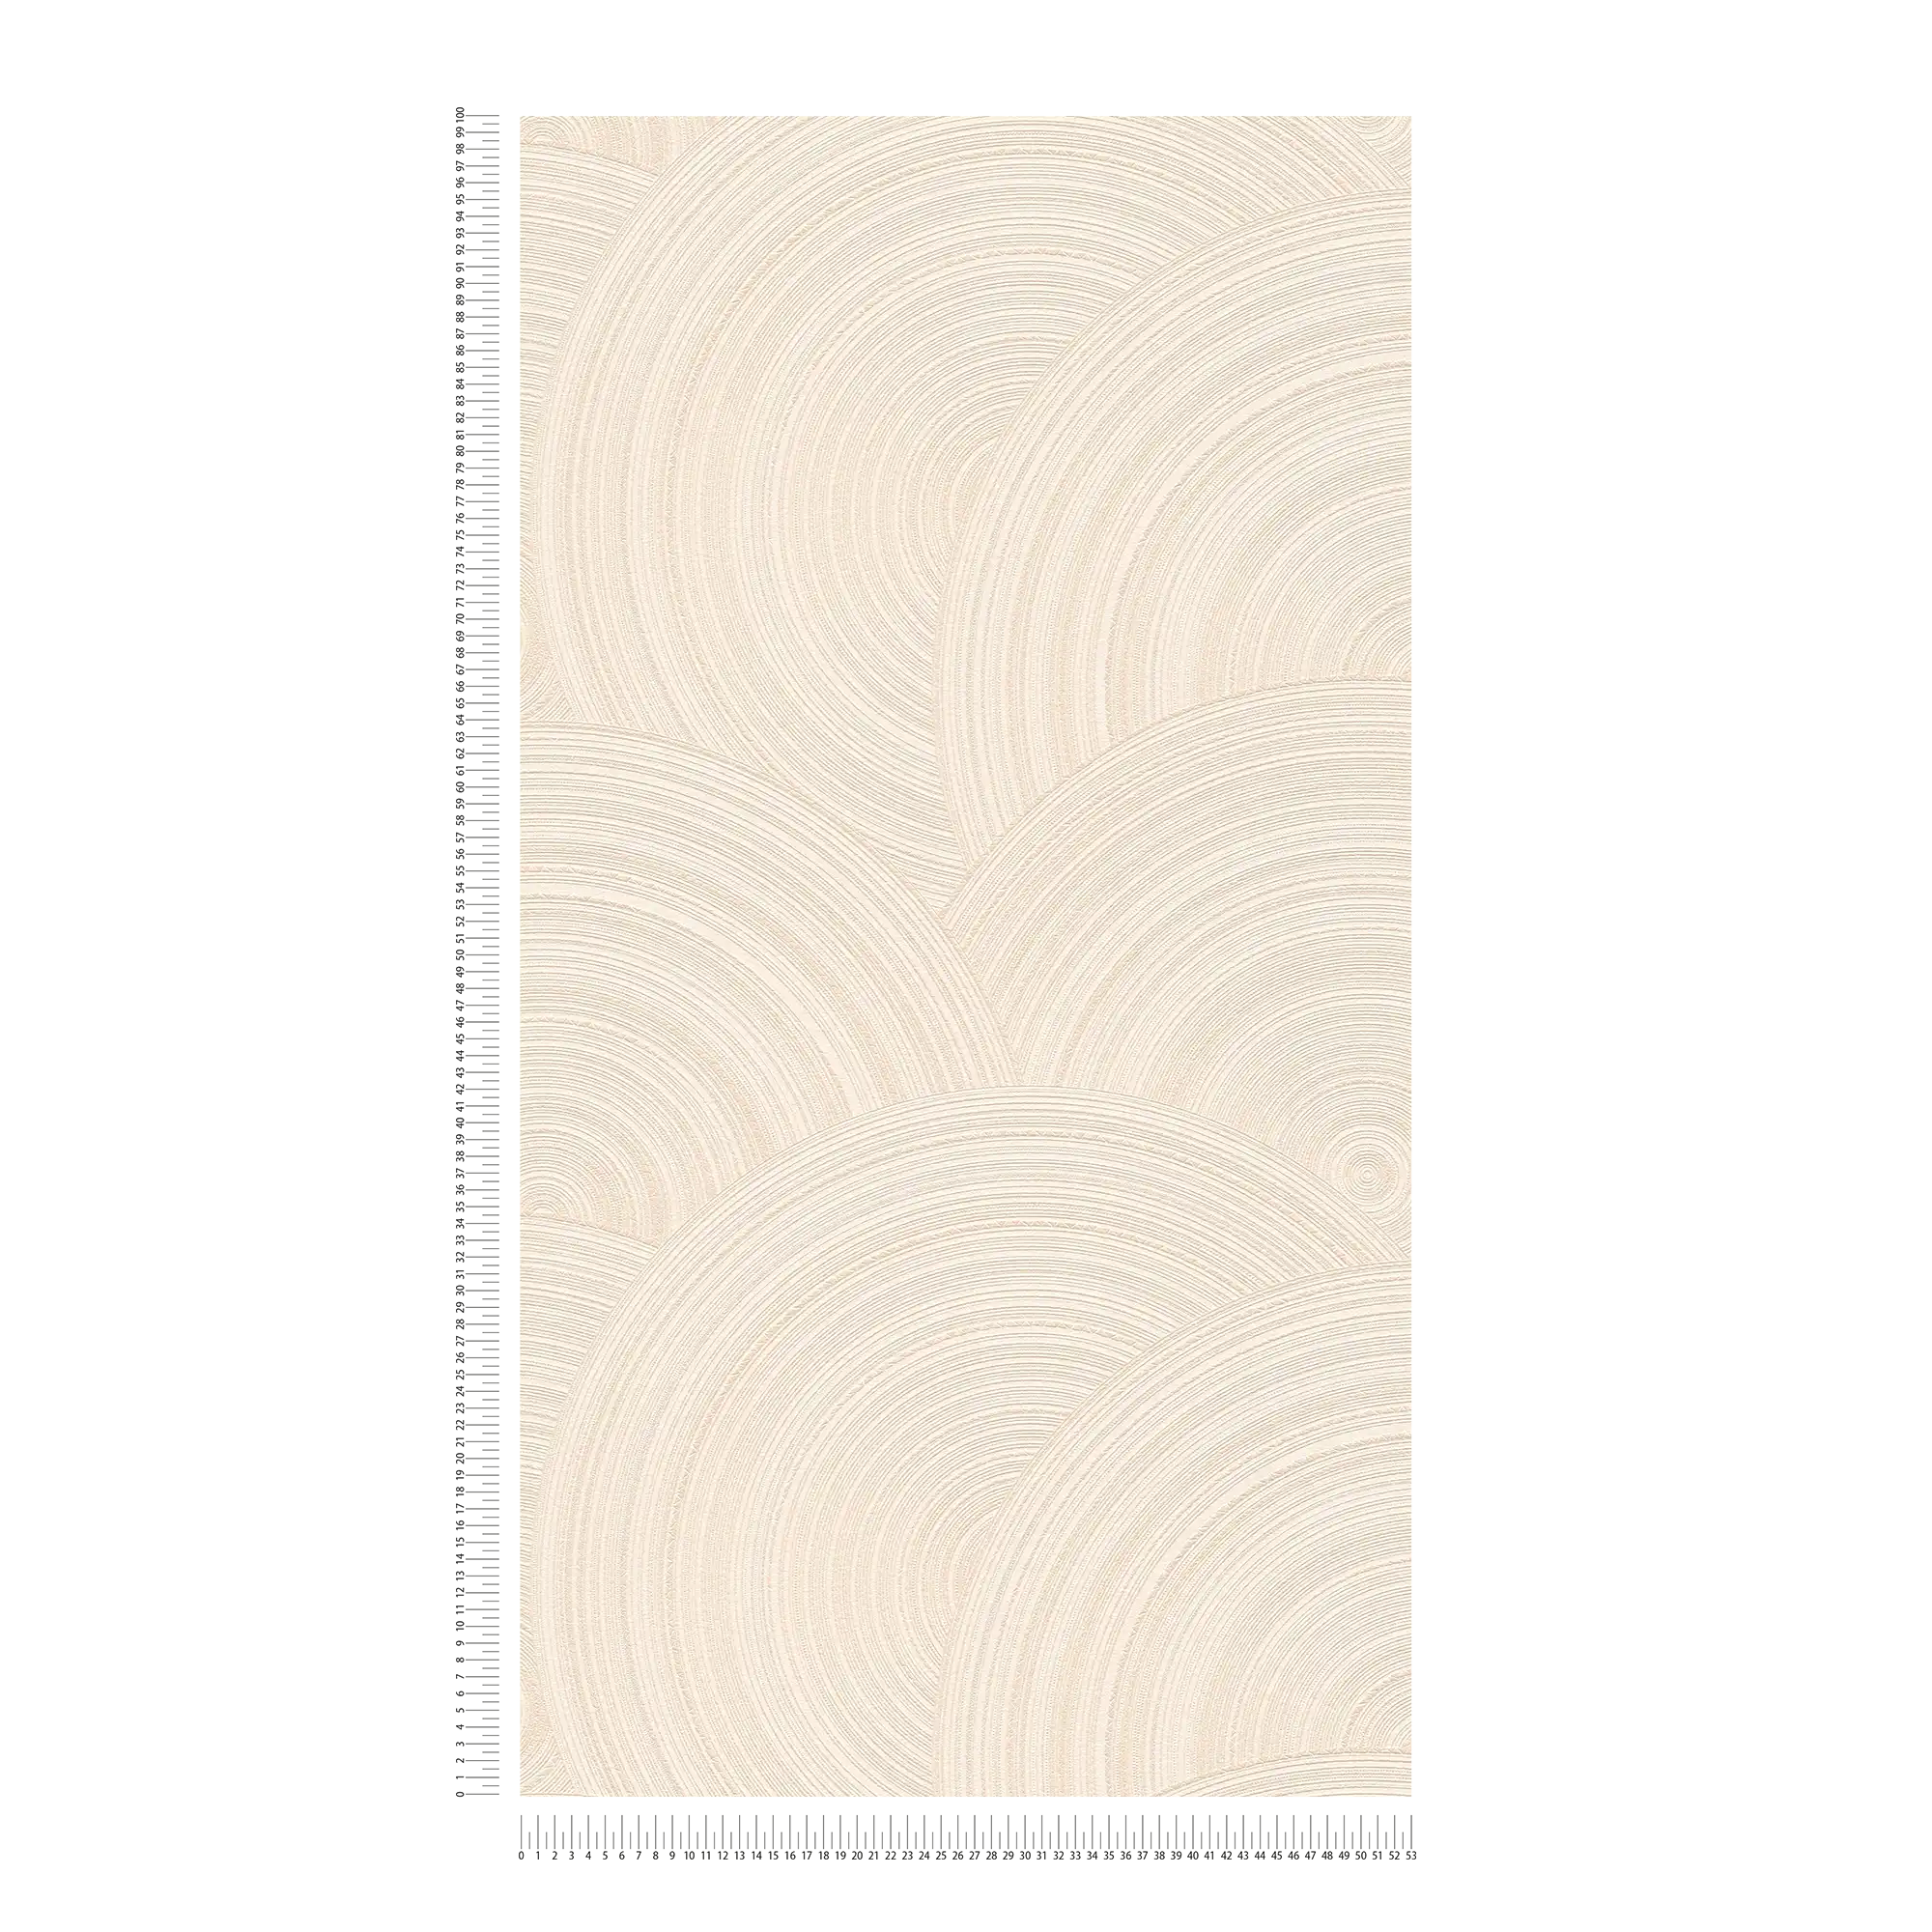             Non-woven wallpaper circle pattern with textured surface - cream, beige
        